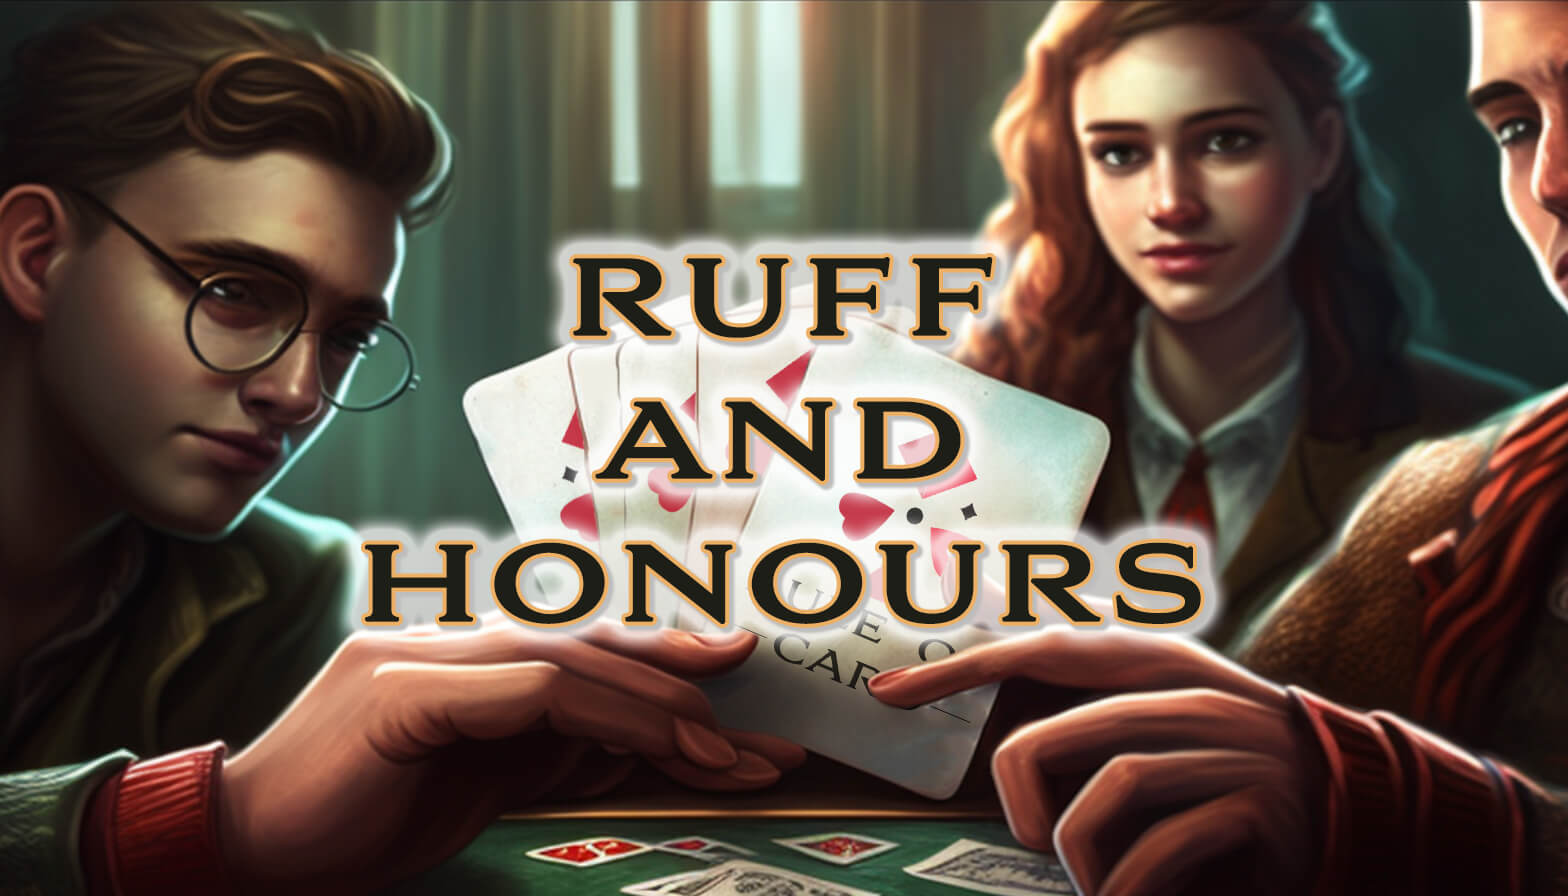 Playing the card game Ruff and Honours